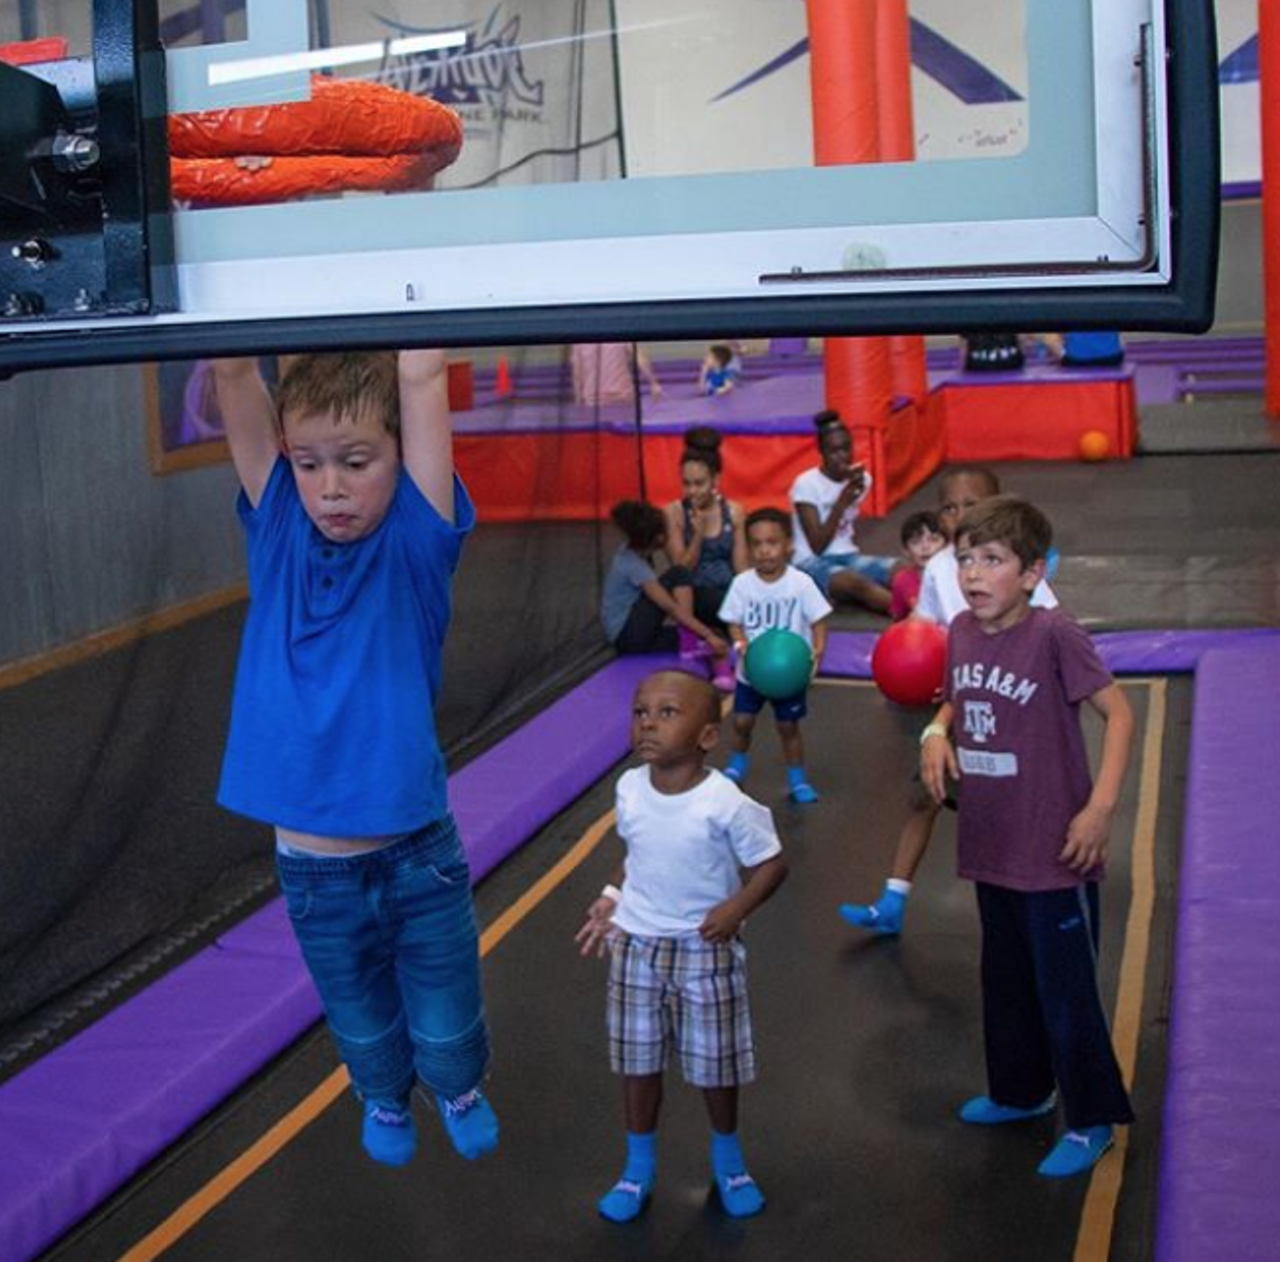 Get jumping at Altitude Trampoline Park
11075 I-10 #126, (210) 697-5867, altitudesa.com
Folks of all ages will have a blast waiting out the rain at Altitude. Whether you want to jump high, do flips or go up against the new rock wall and challenge course, you’ll definitely wear yourself out at this high-energy spot.
Photo via Instagram / altitude_satx